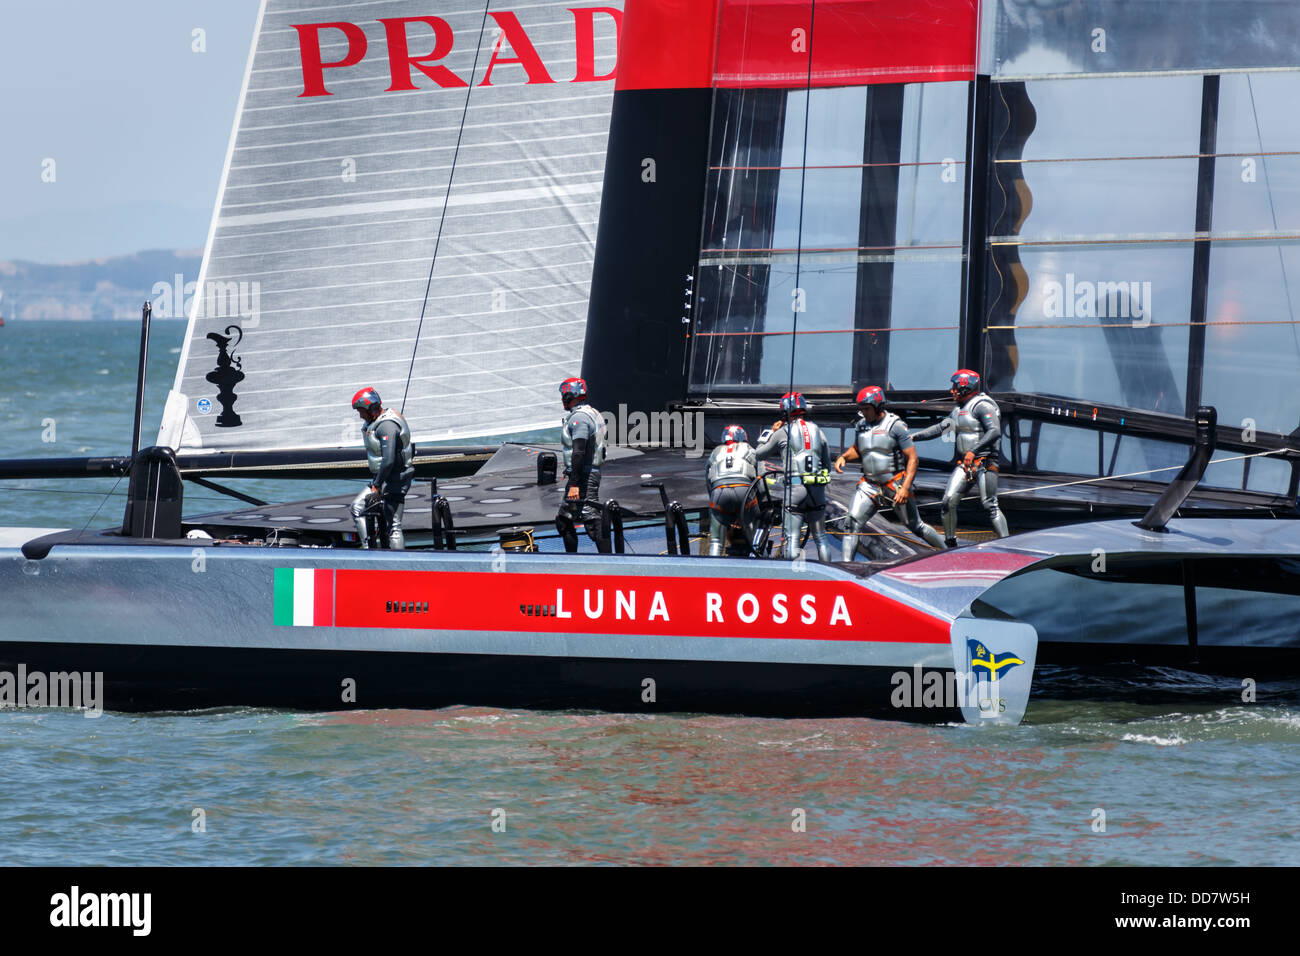 Close-up as Team Luna Rossa races by in AC 72 Sailboat in Louis Vuitton Cup race on San Francisco Bay, August 21, 2013 Stock Photo